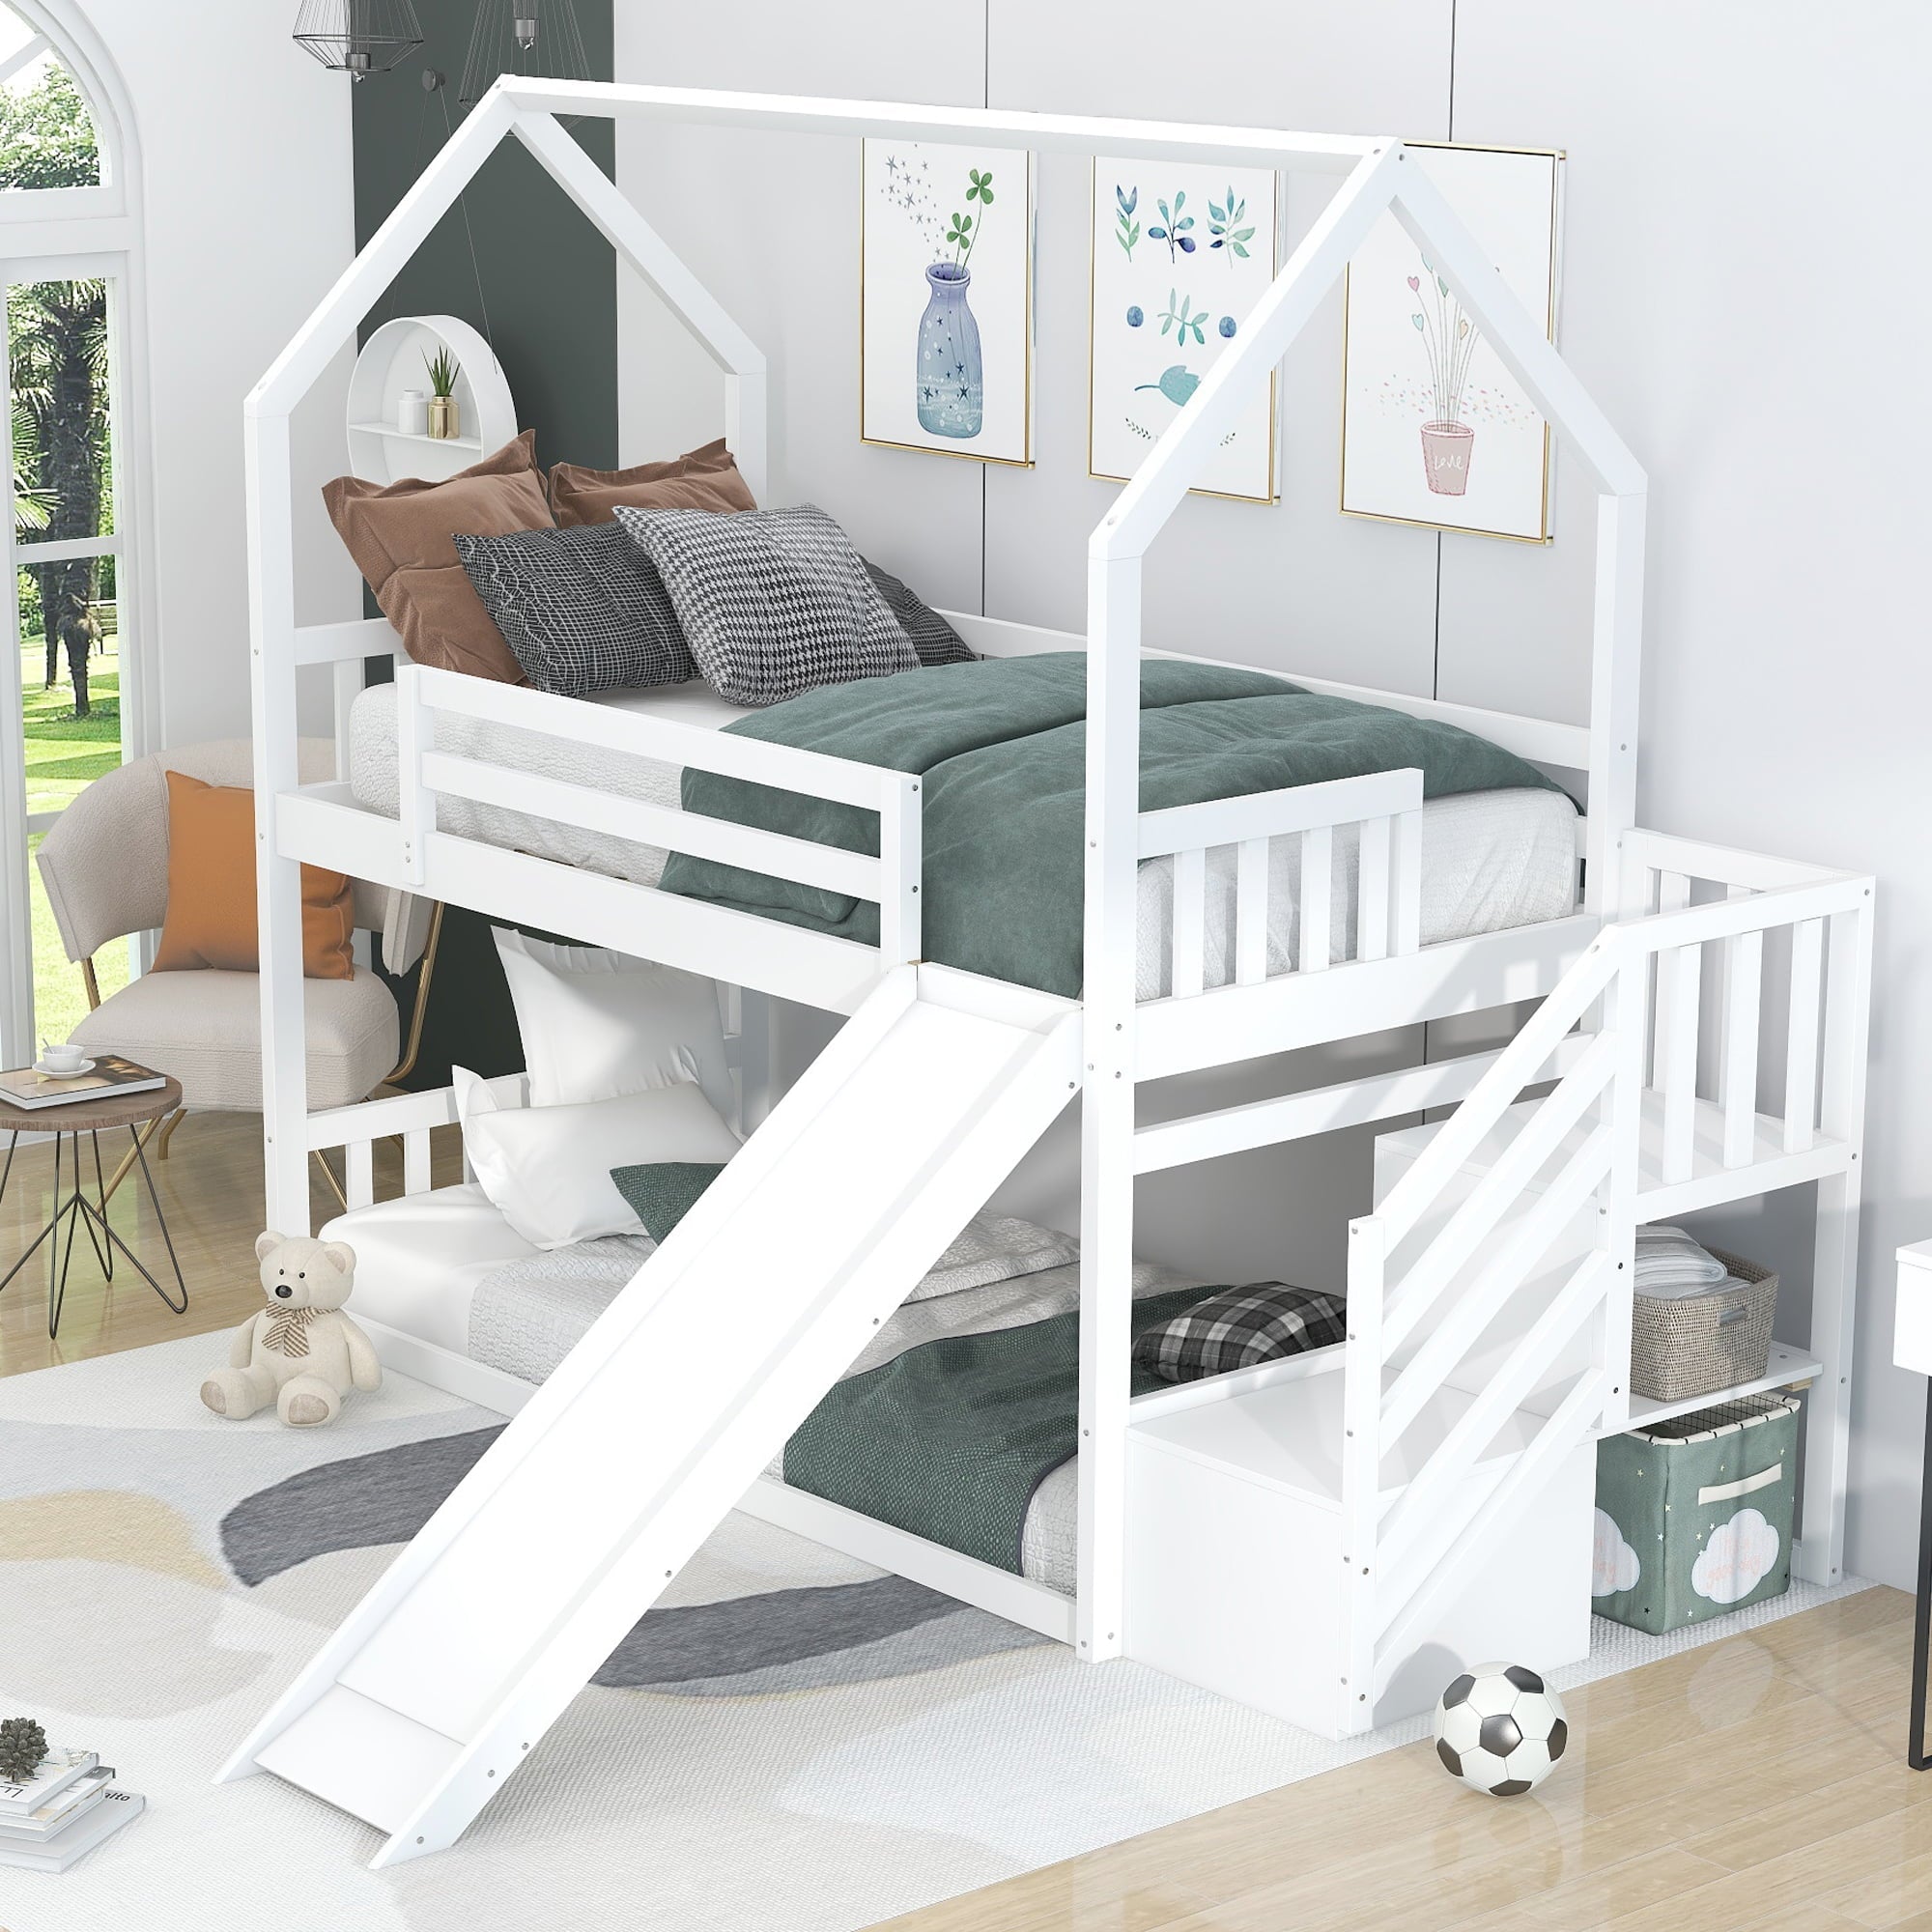 EUROCO Twin over Twin House Bunk Bed with Staircase for Kids for Bedroom, White